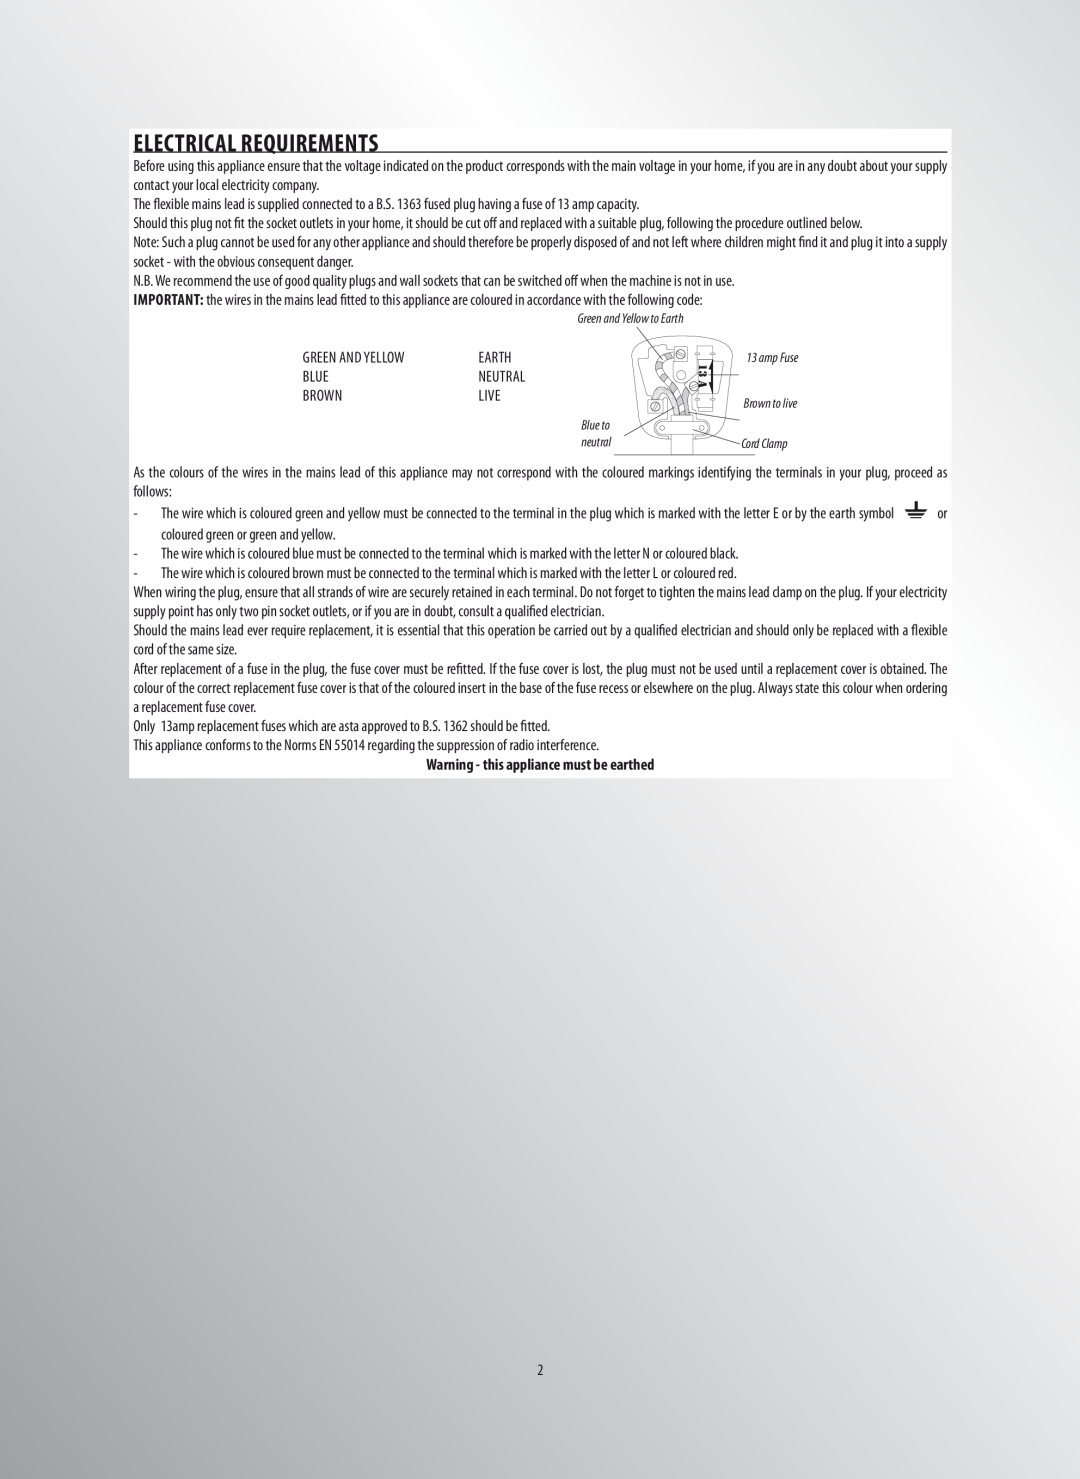 DeLonghi 5713214281 manual Electrical requirements, Warning - this appliance must be earthed 